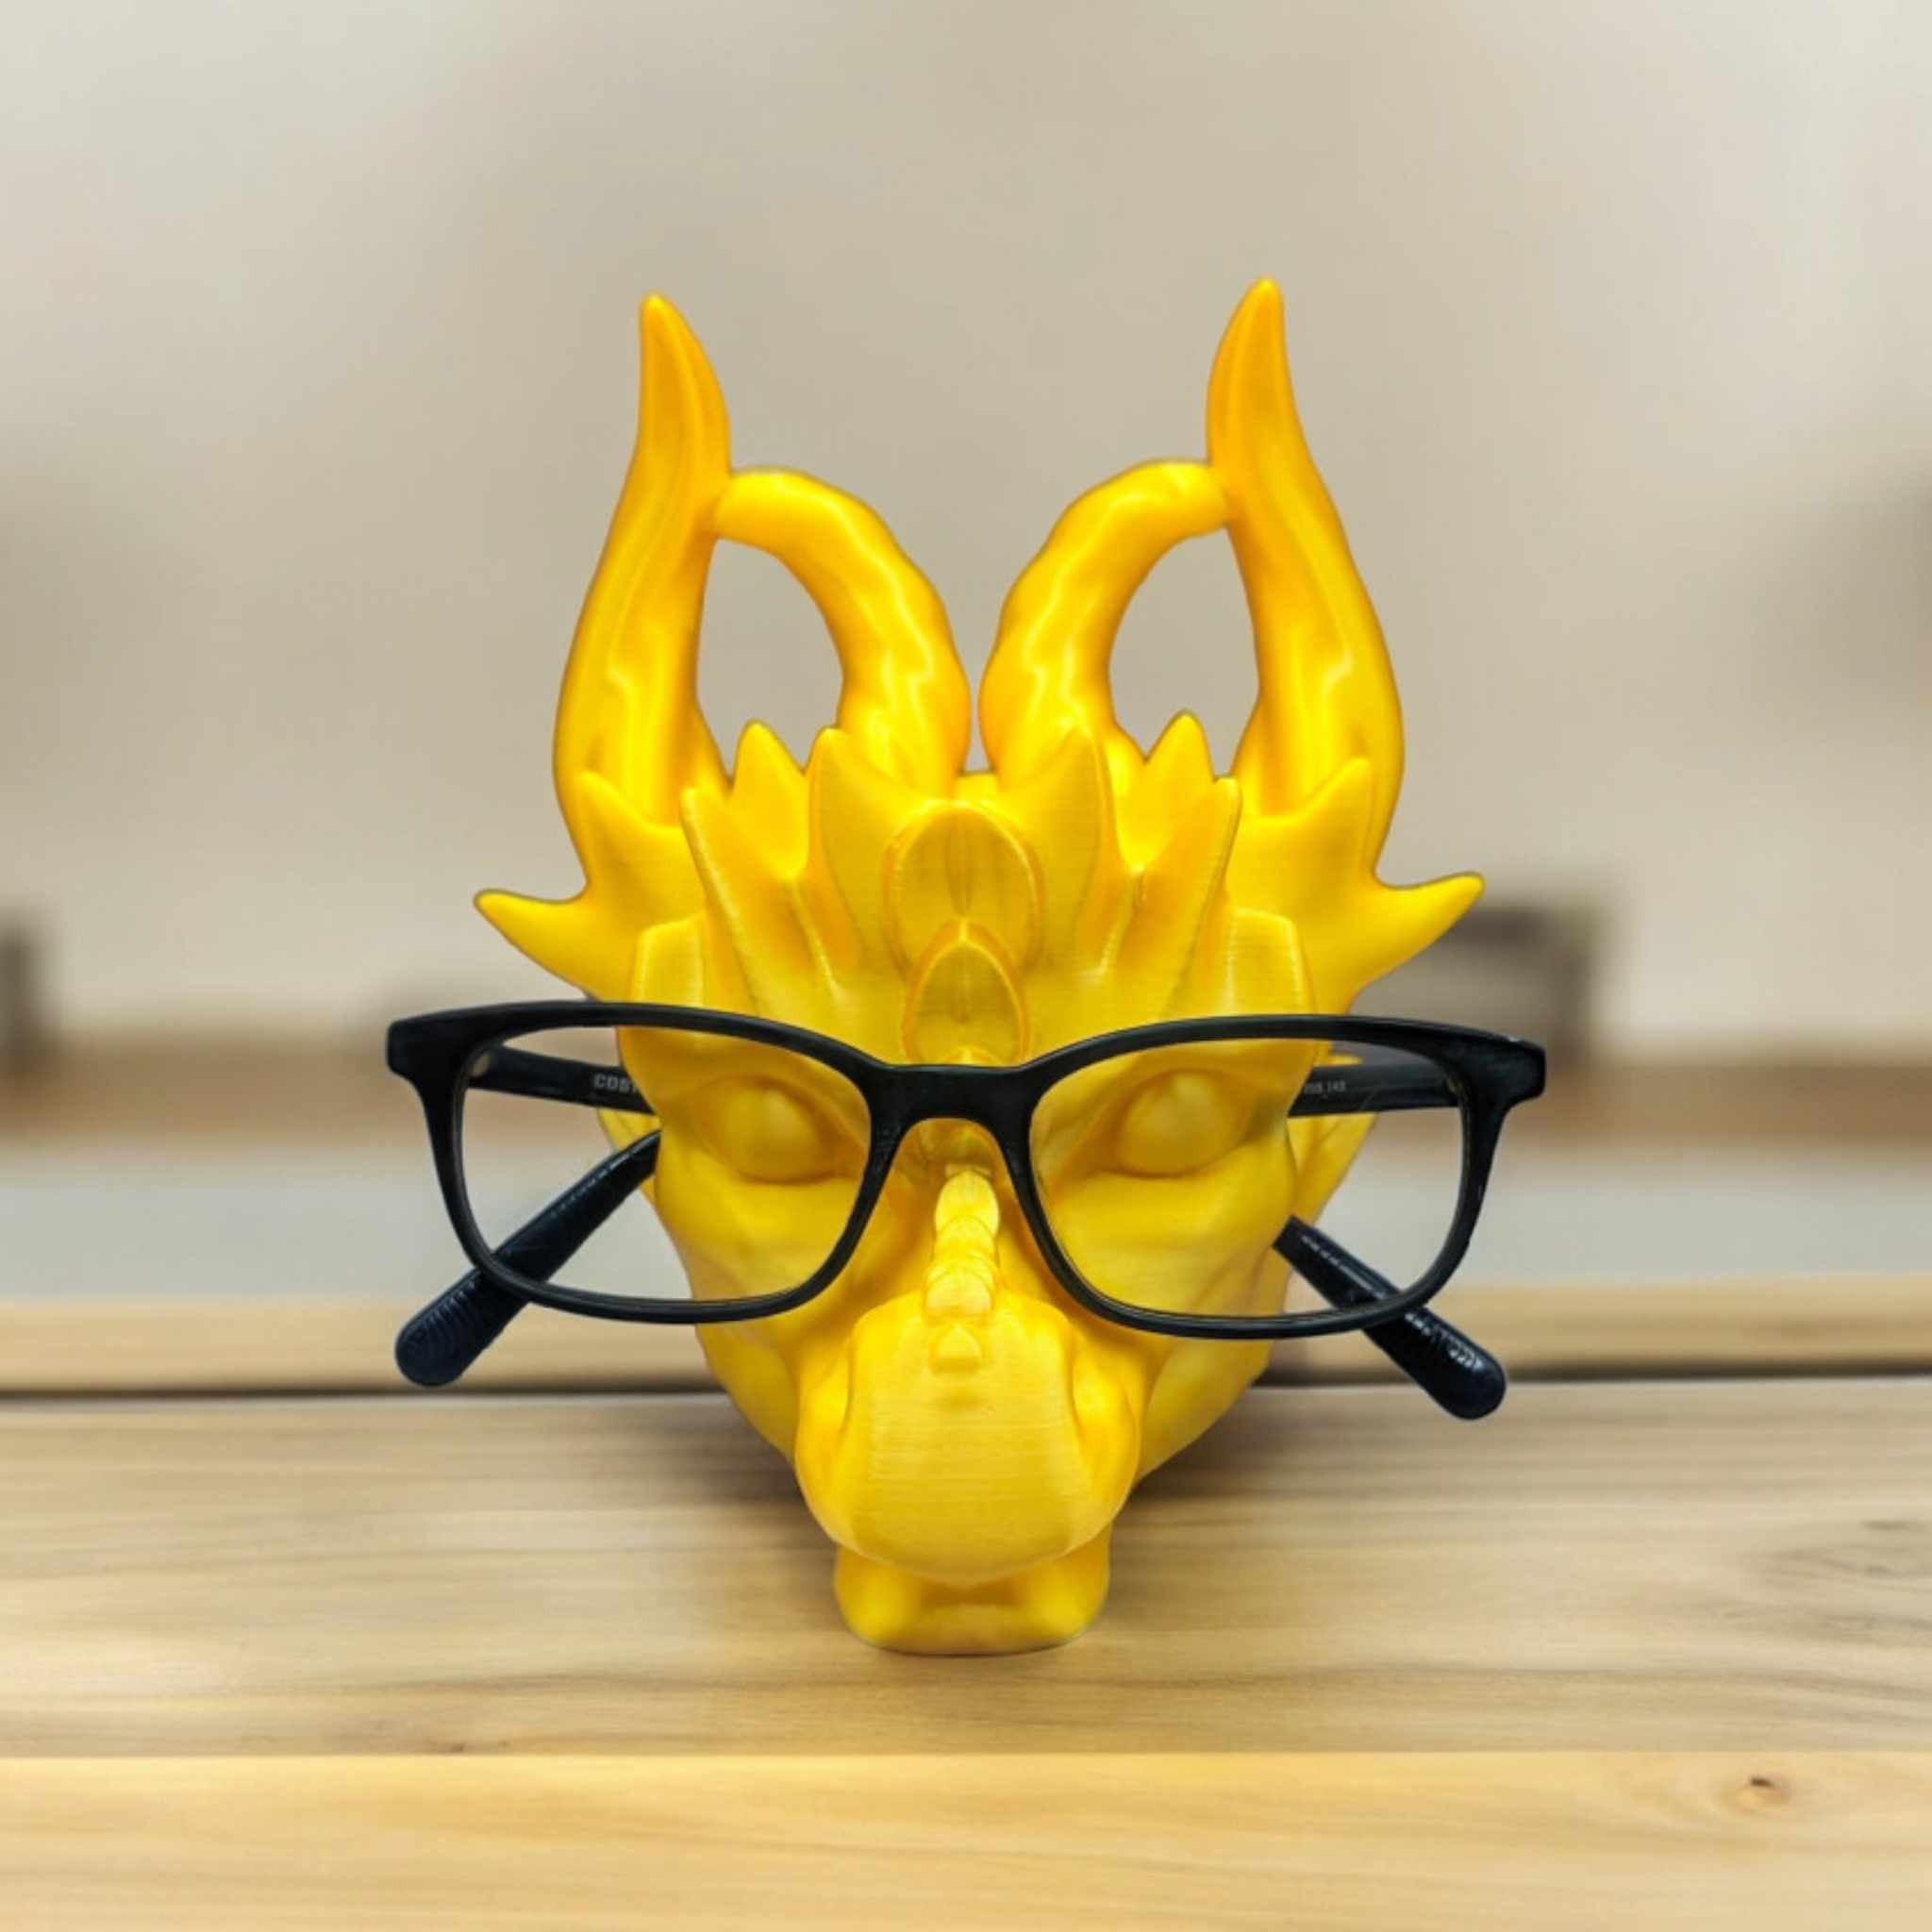 3D Printed Dragon Glasses Holder, Unique Eyewear Stand, Fantasy Desk Organizer, Perfect Geeky Gift